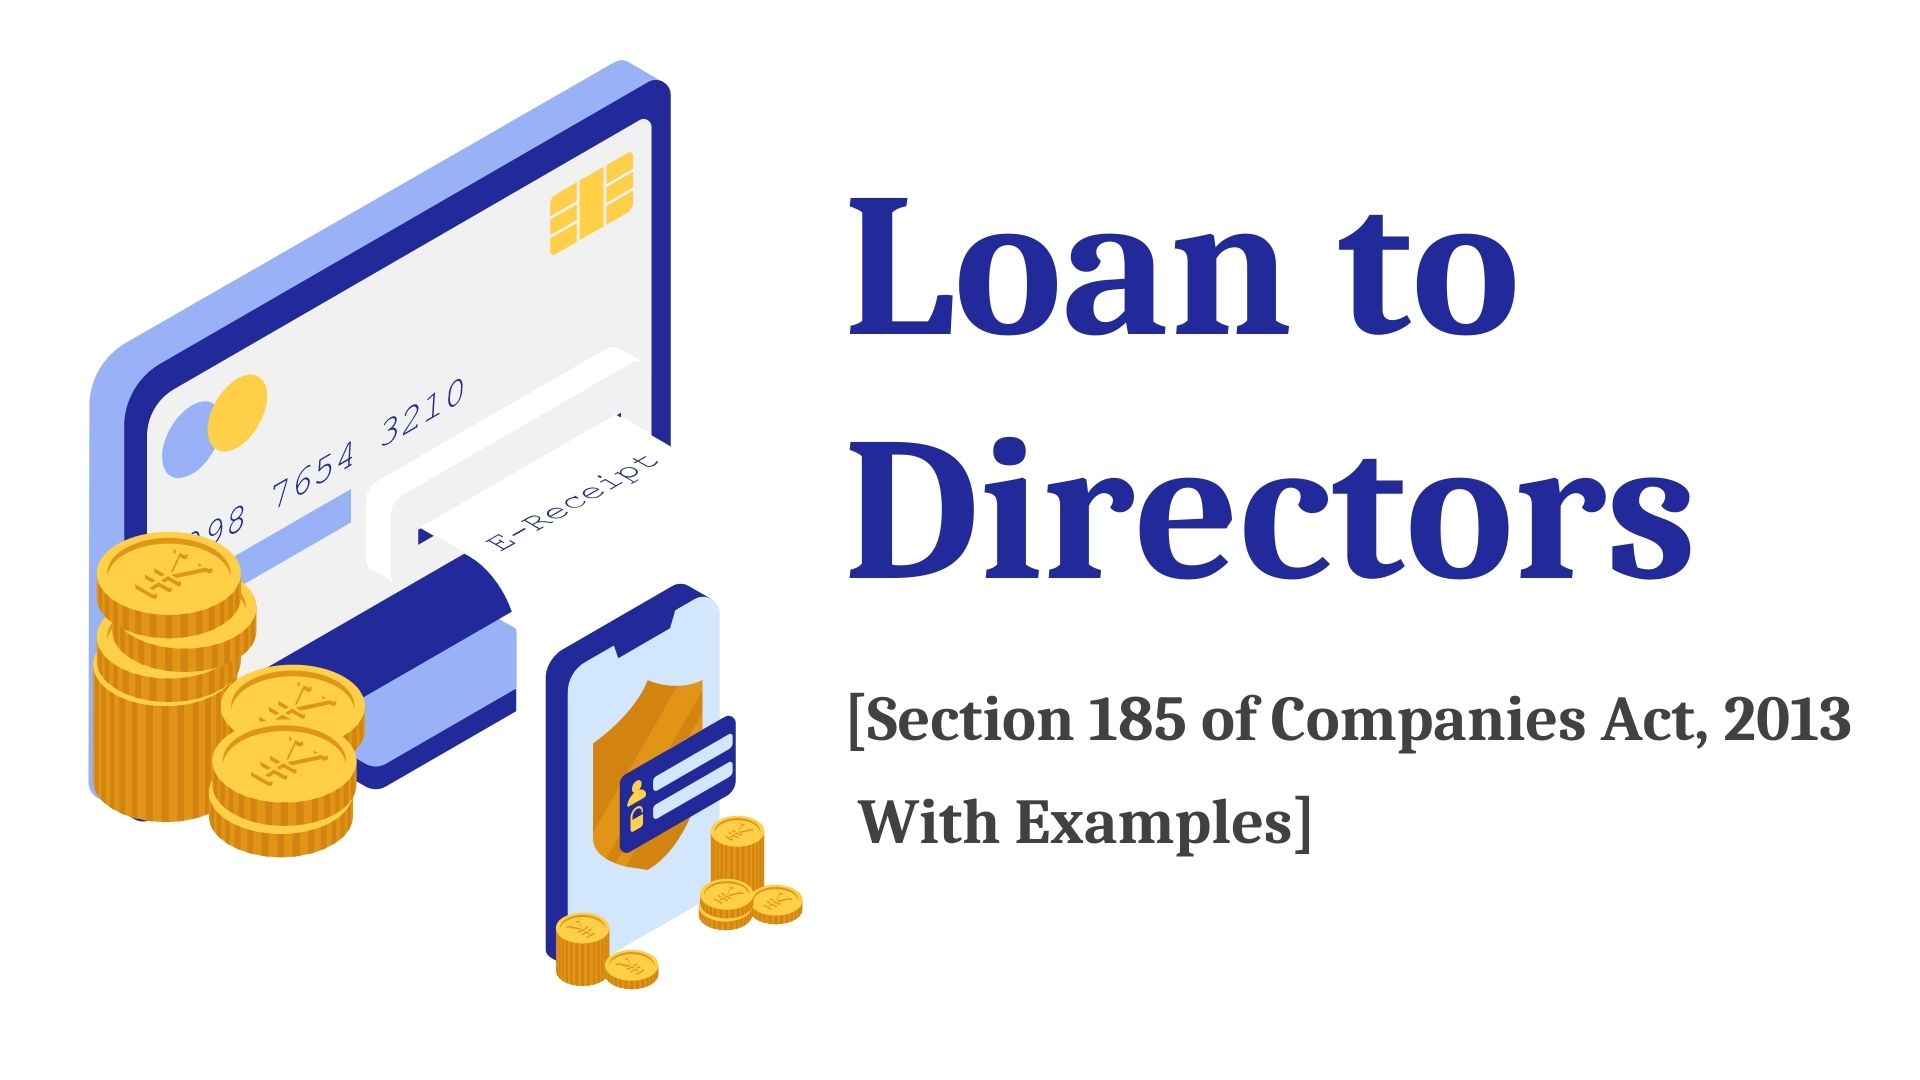 Guide to Loans to Directors Under Section 185